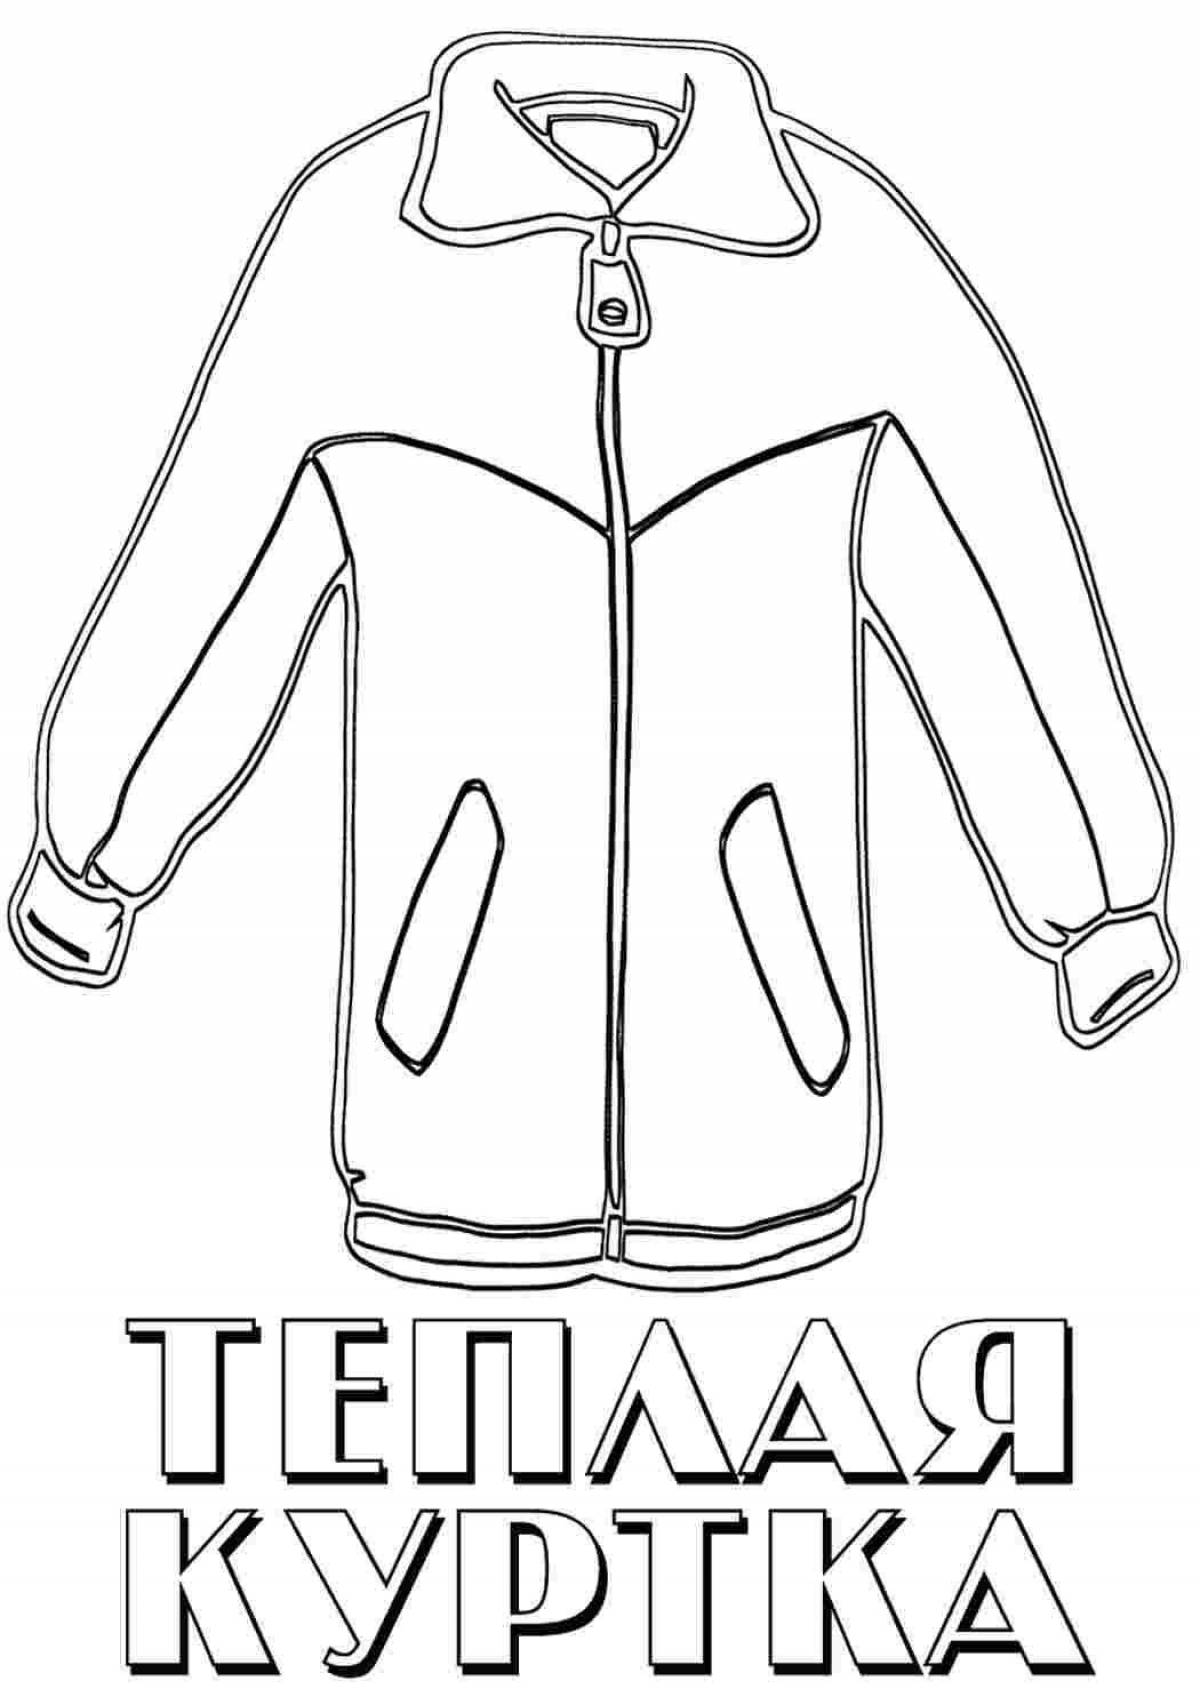 Coloring page with colorful outerwear